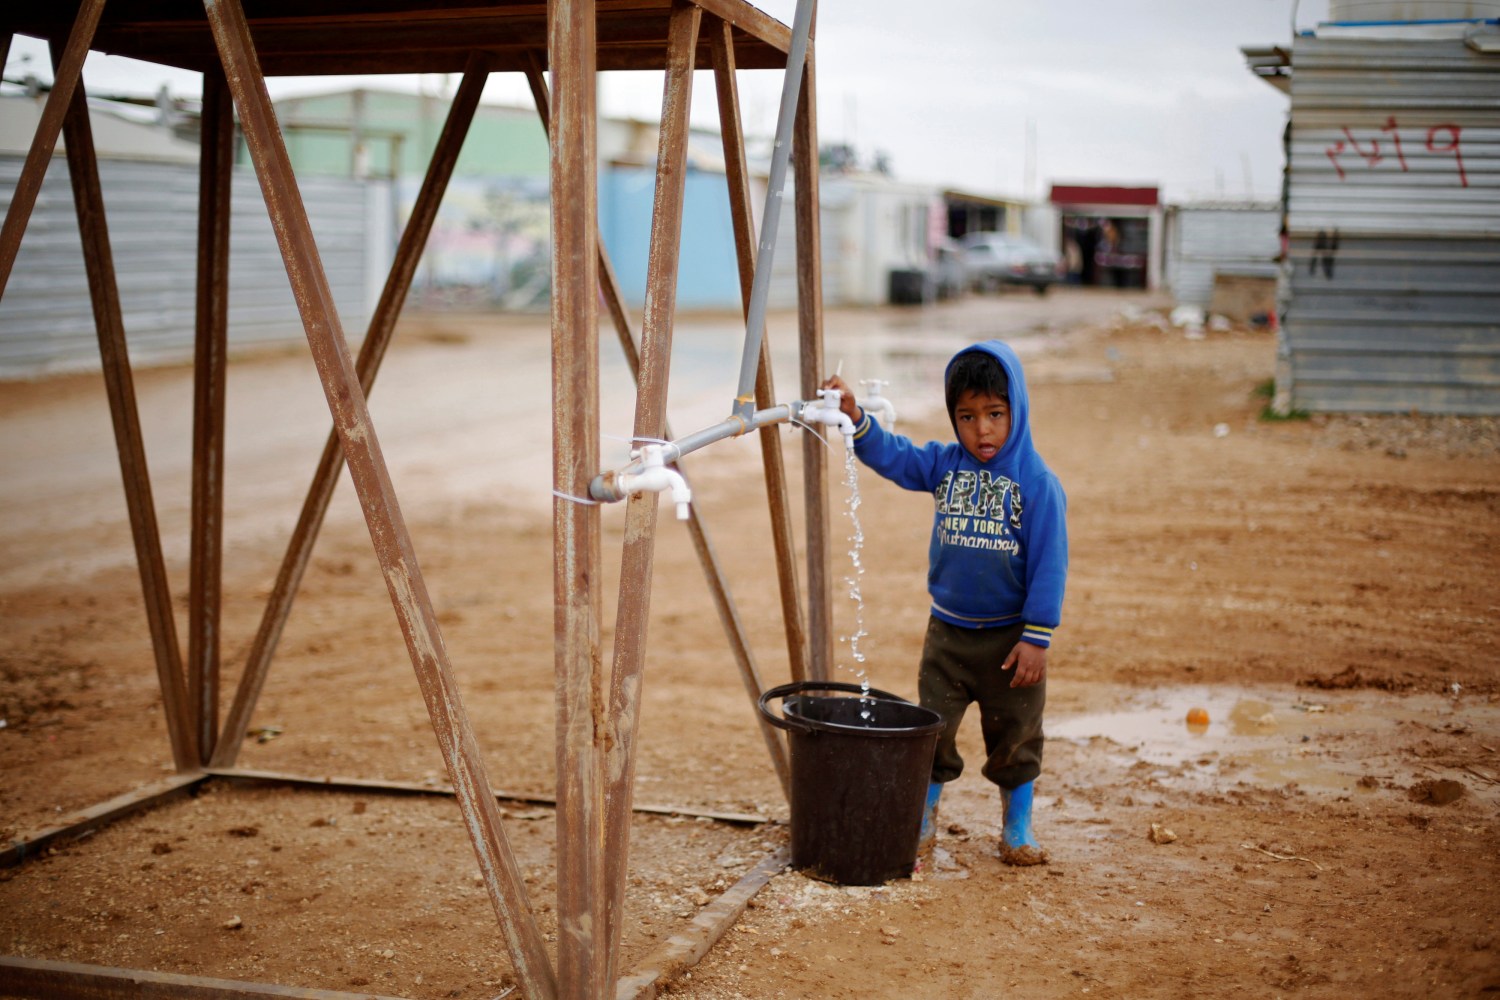 A Syrian refugee child collects water during rainy weather at the Al Zaatari refugee camp in the Jordanian city of Mafraq, near the border with Syria December 18, 2016. REUTERS/Muhammad Hamed